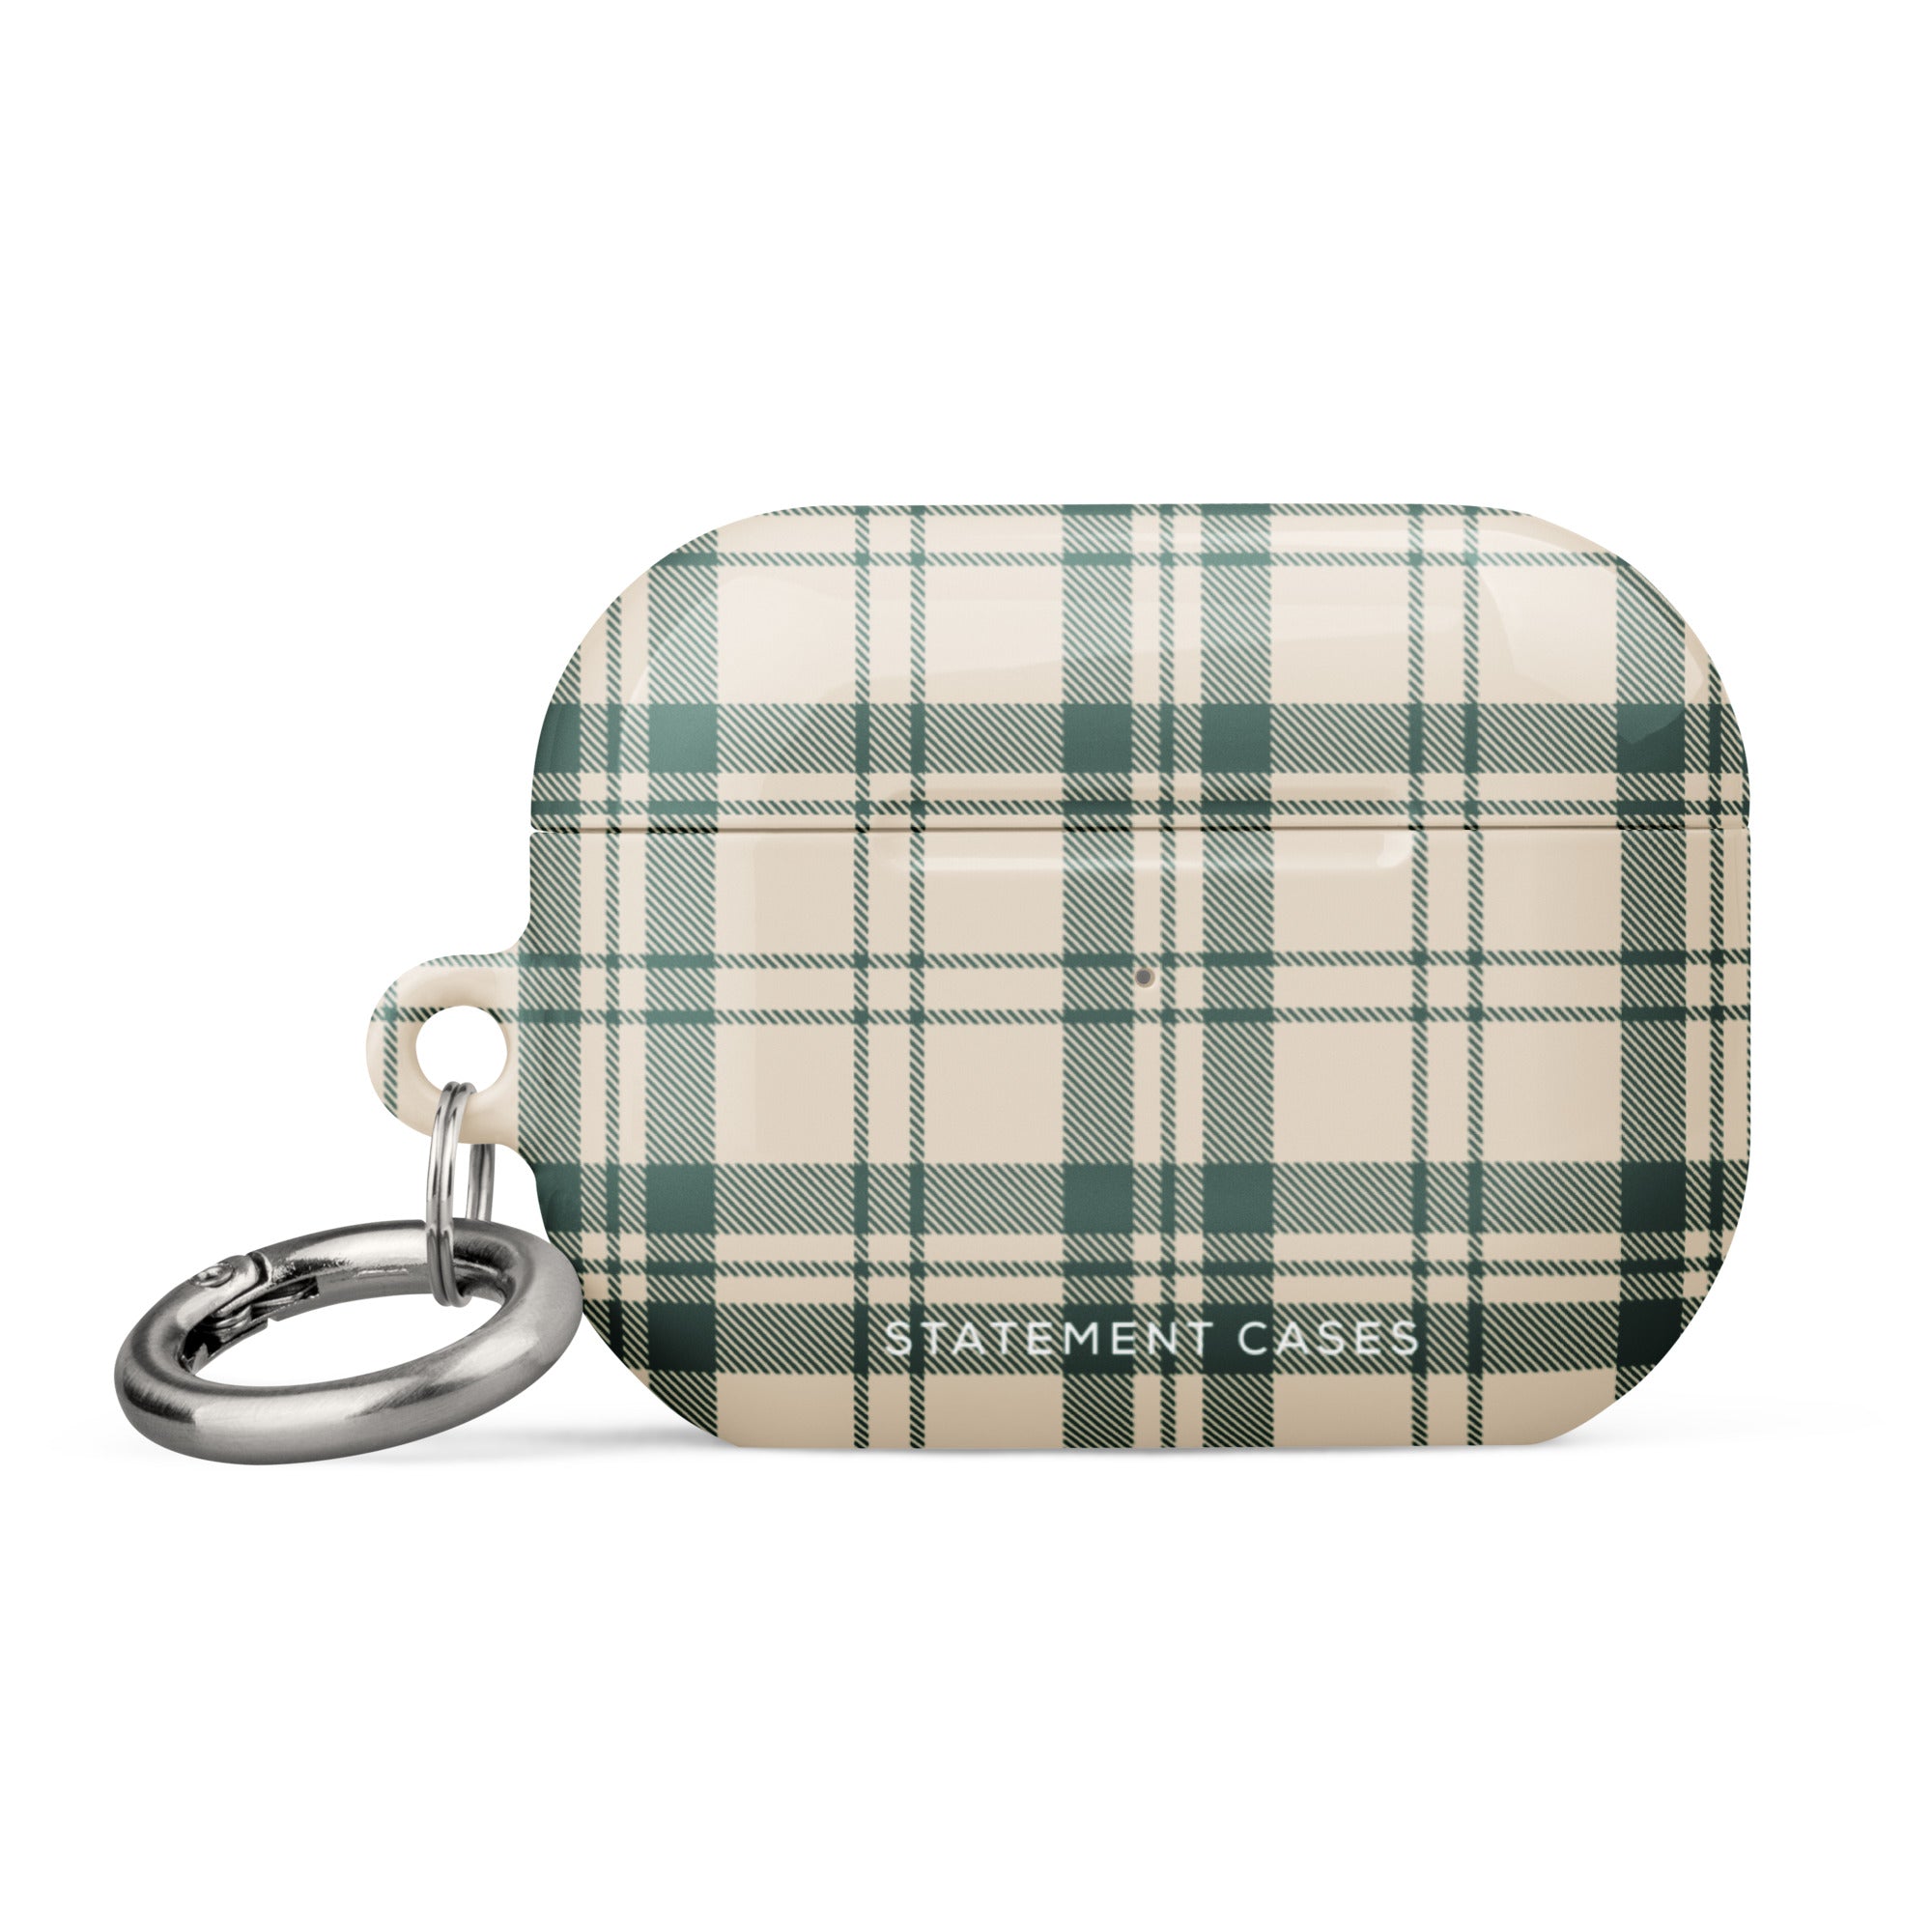 A small, rectangular Elegant Plaid for AirPods Pro Gen 2 case with a green and white plaid pattern. The impact-absorbing case features a metal carabiner attached to the left side. The text "Statement Cases" is printed in white at the bottom center.